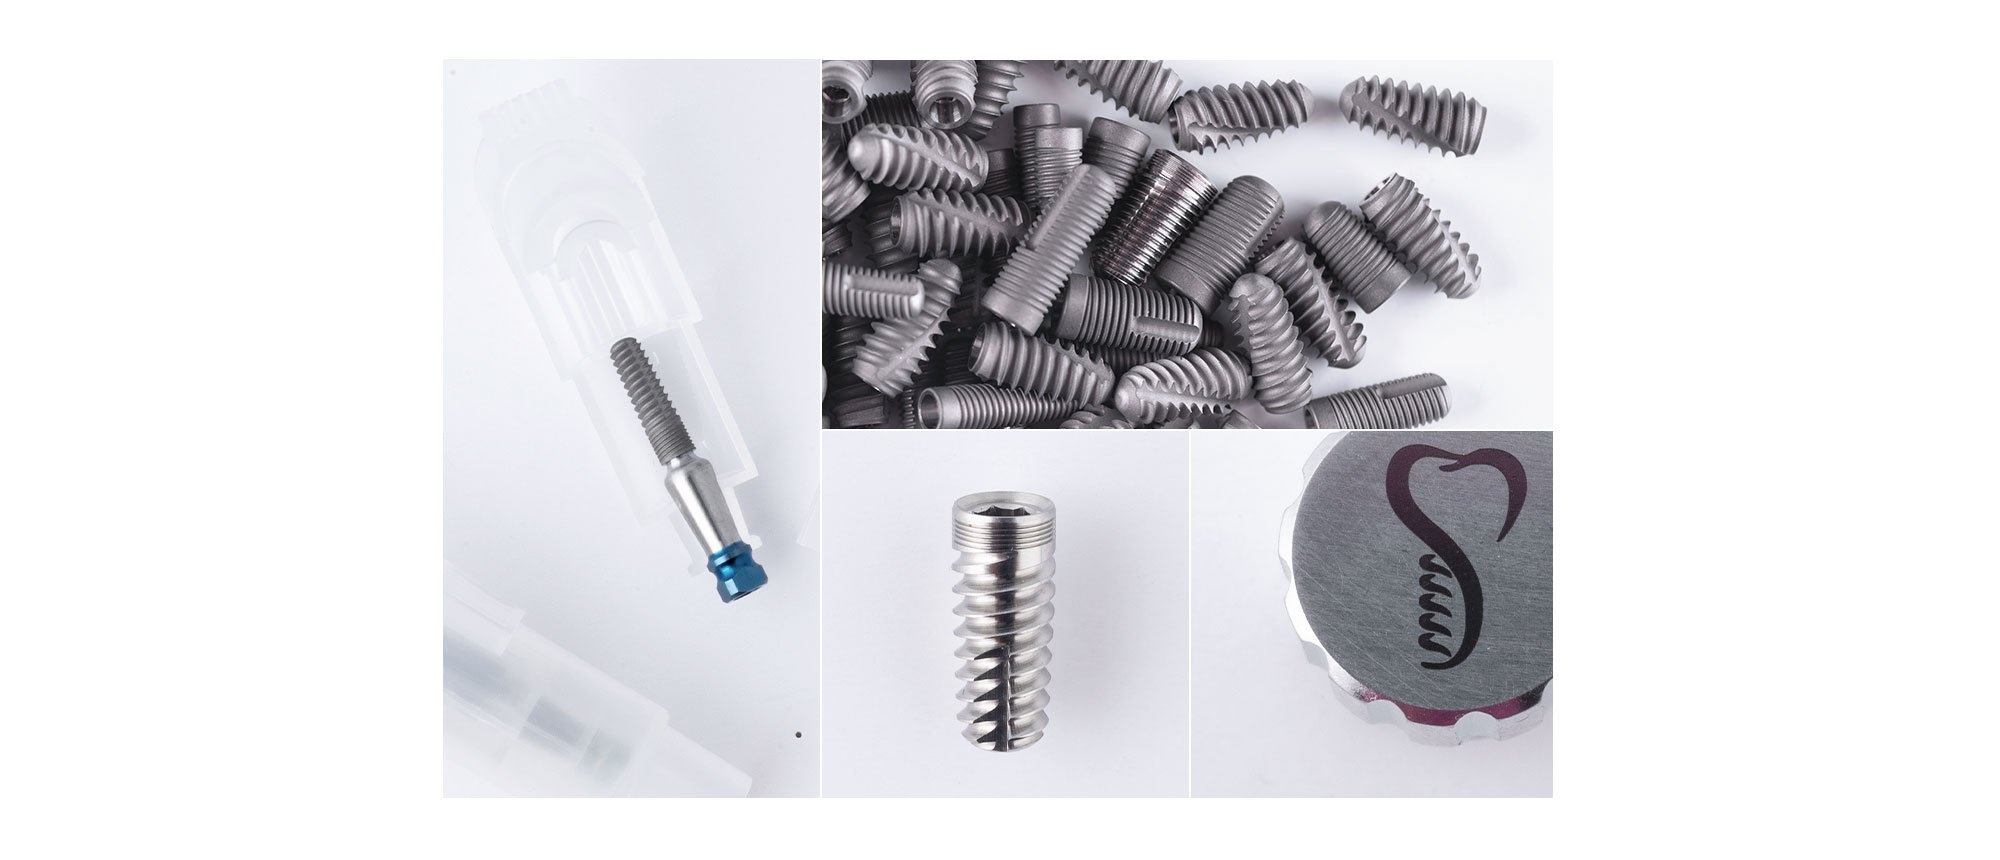 Collage of Implant Logistics dental implant product photos created by Vendi Advertising